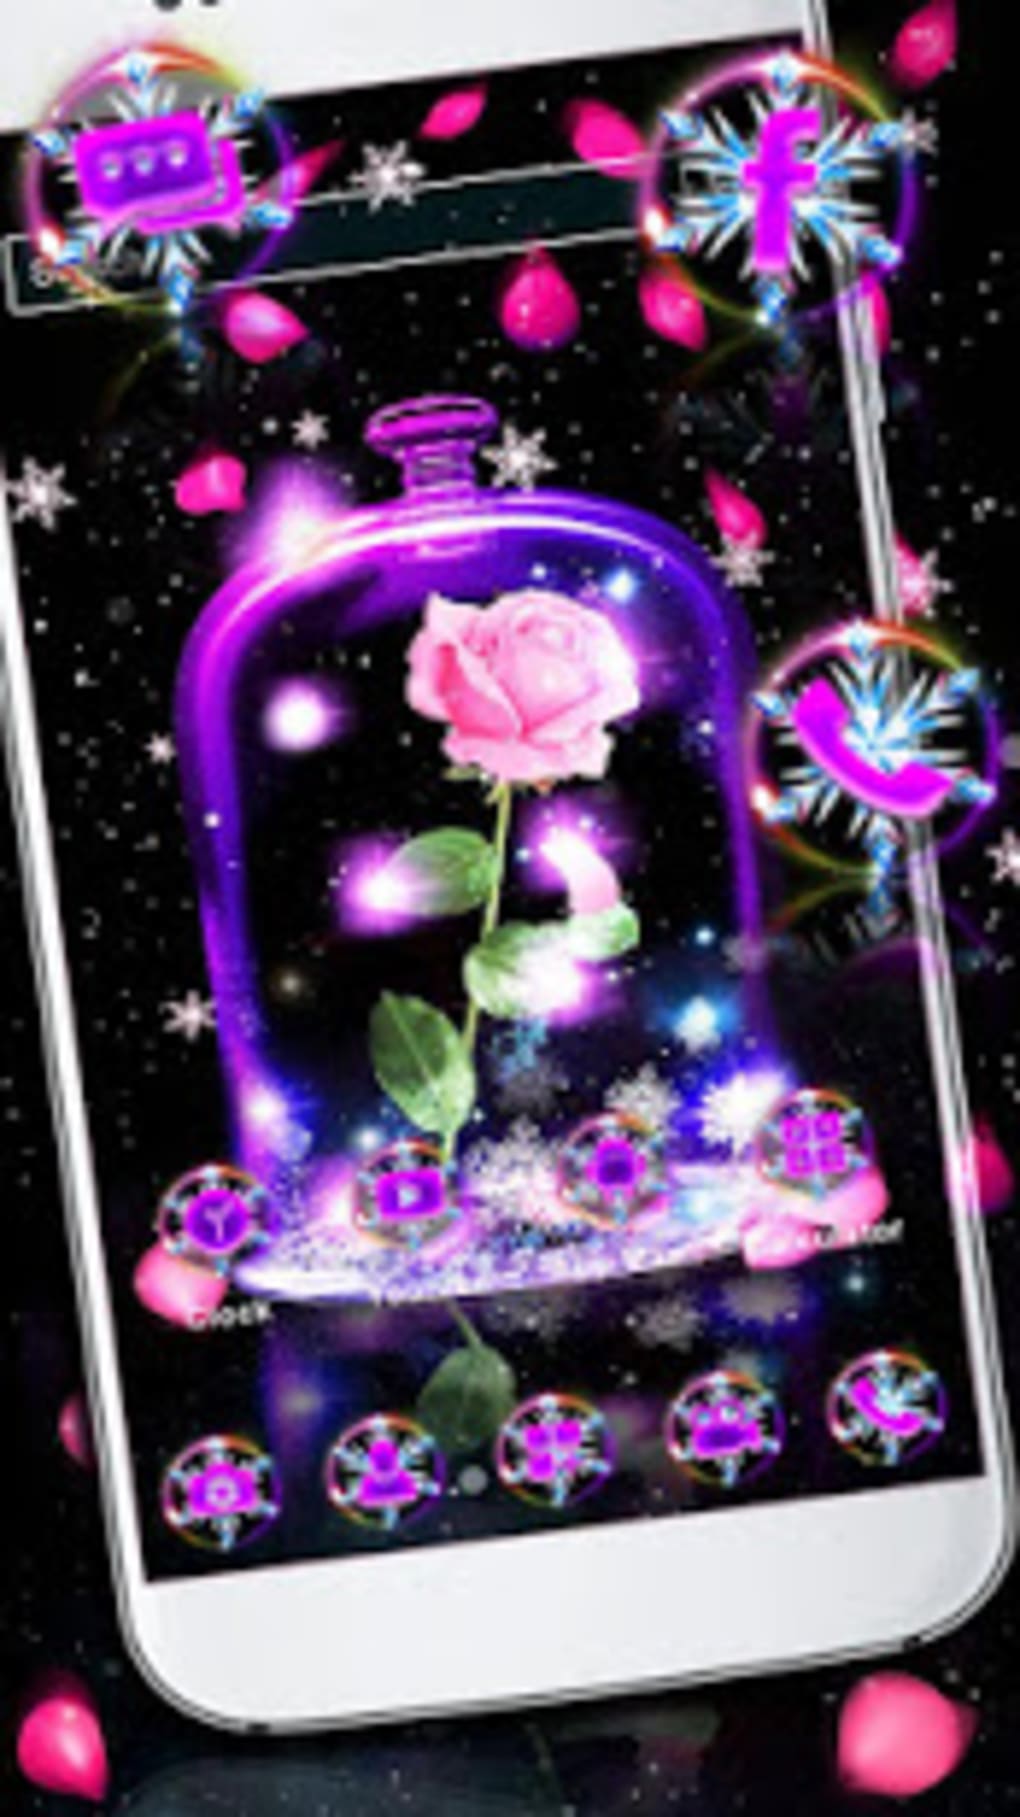 galaxy live wallpapers hd,mobile phone case,mobile phone accessories,violet,purple,technology